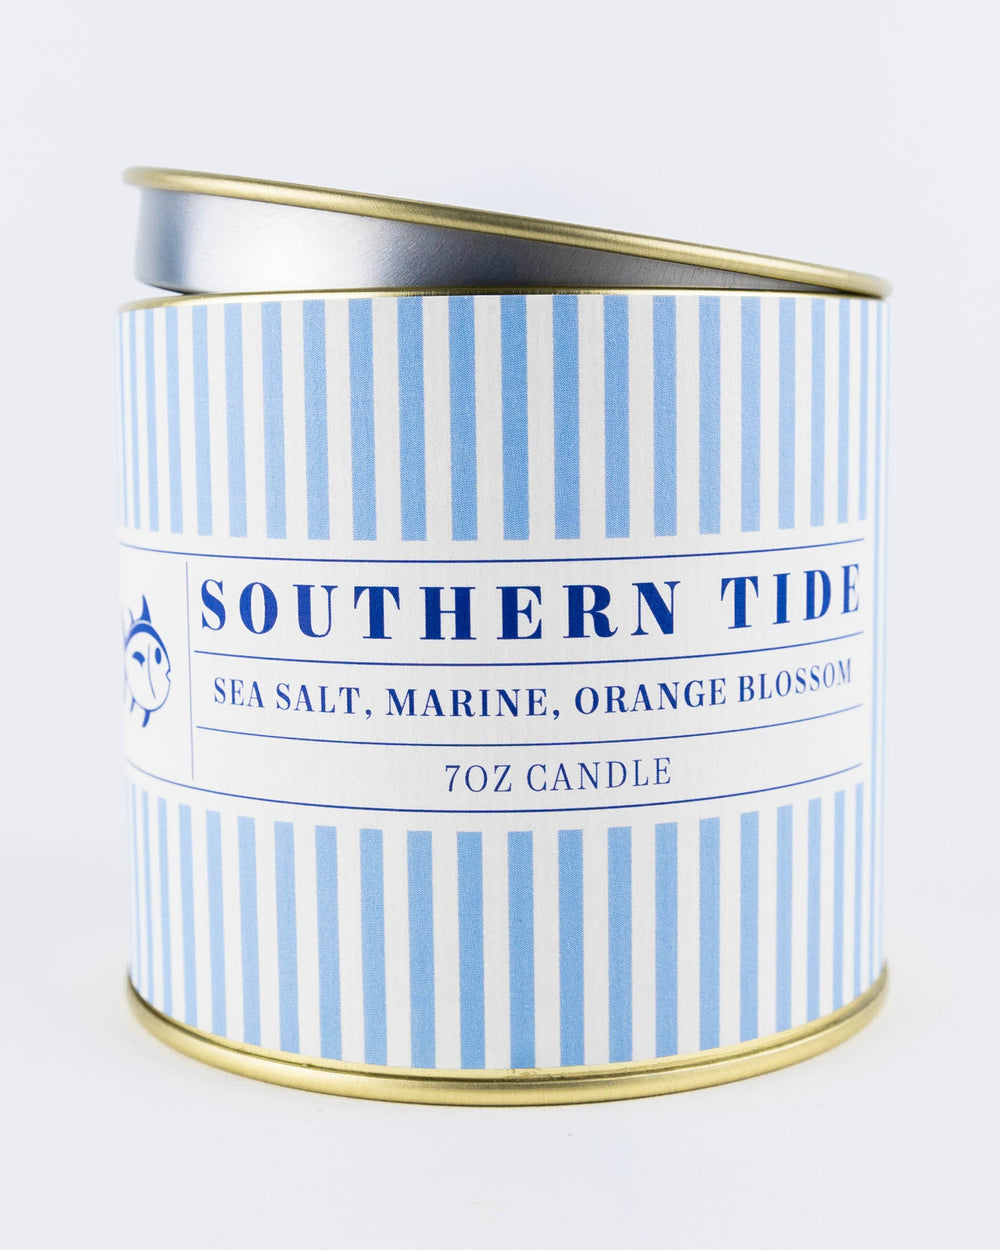 The front semiopen view of the Southern Tide Southern Tide Candlefish Candle by Southern Tide - Blue